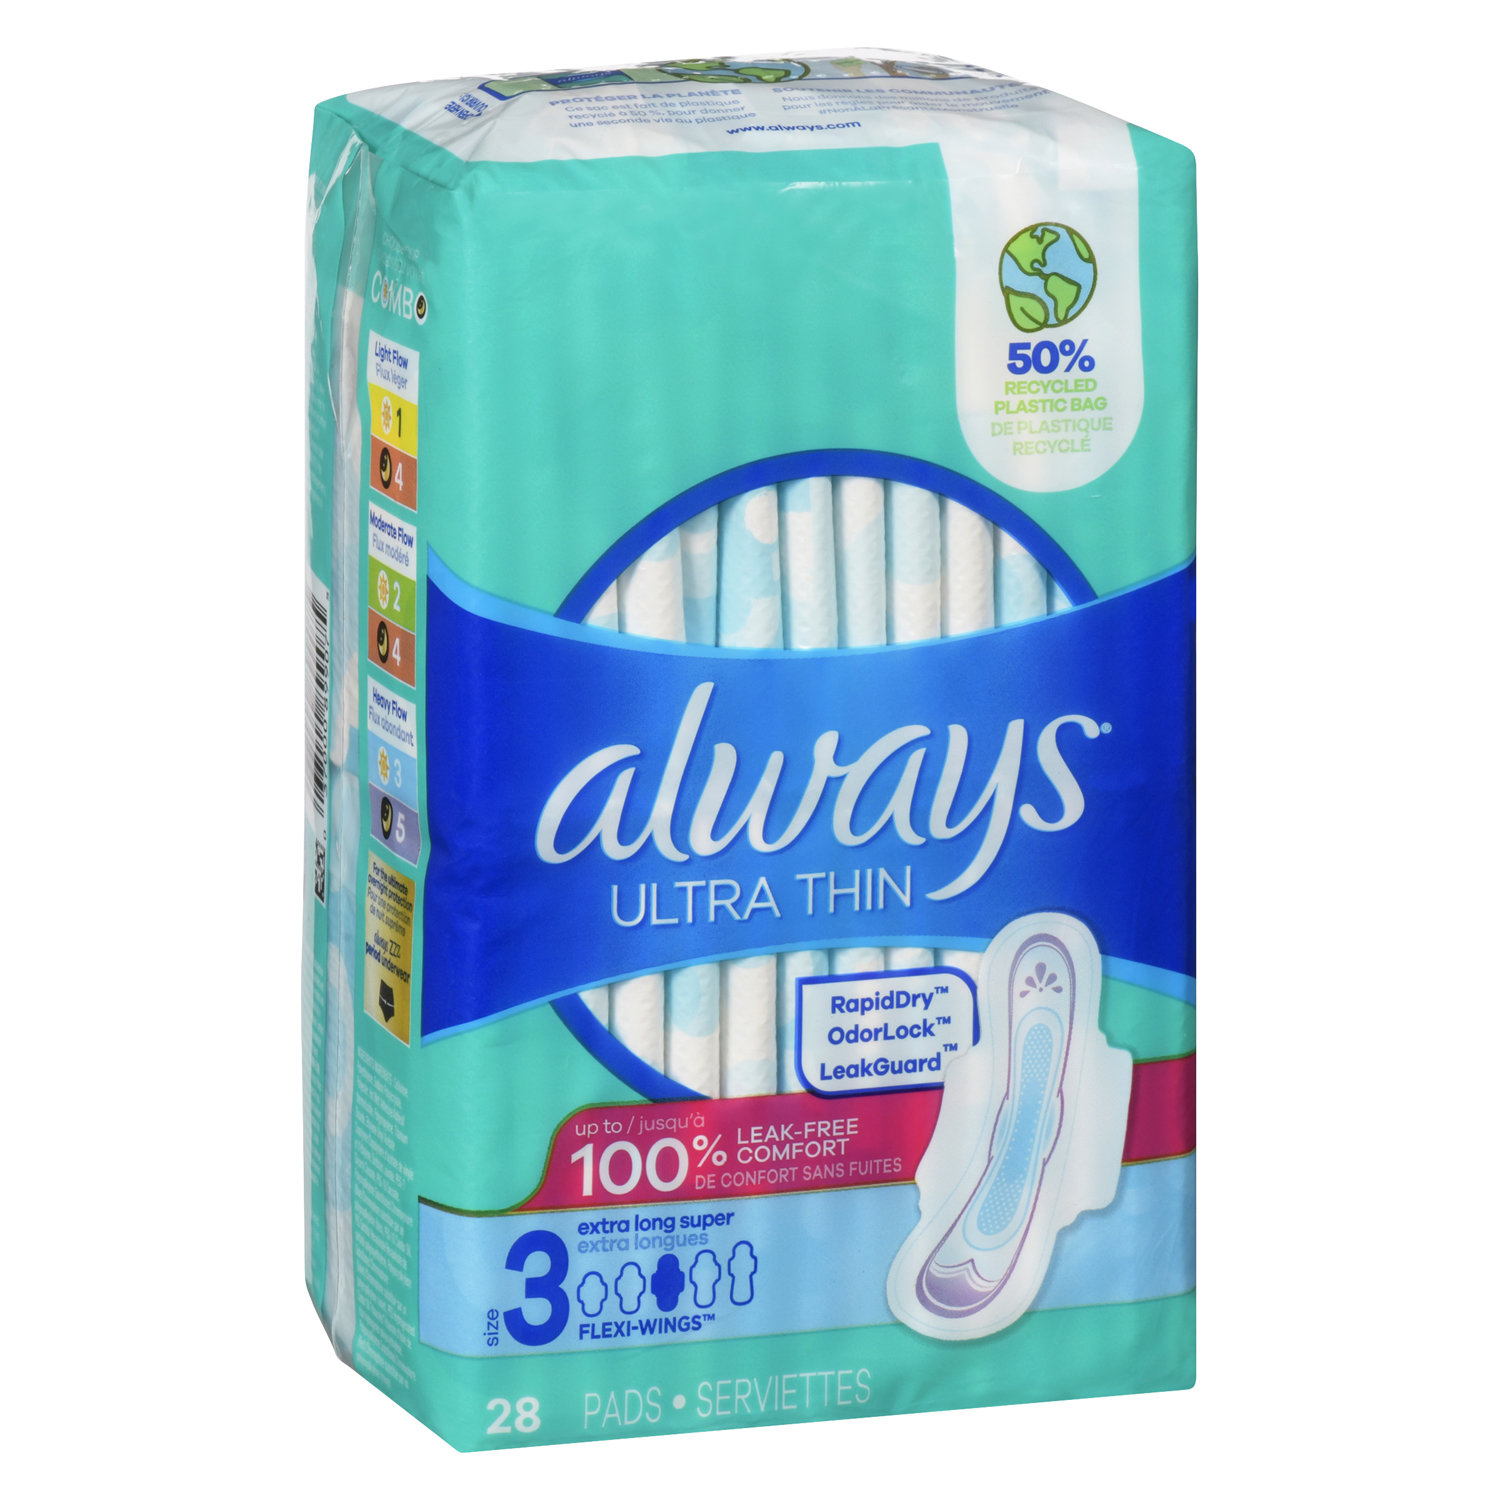 Always - Ultra Thin Extra Long Super Pads - Wings - Save-On-Foods